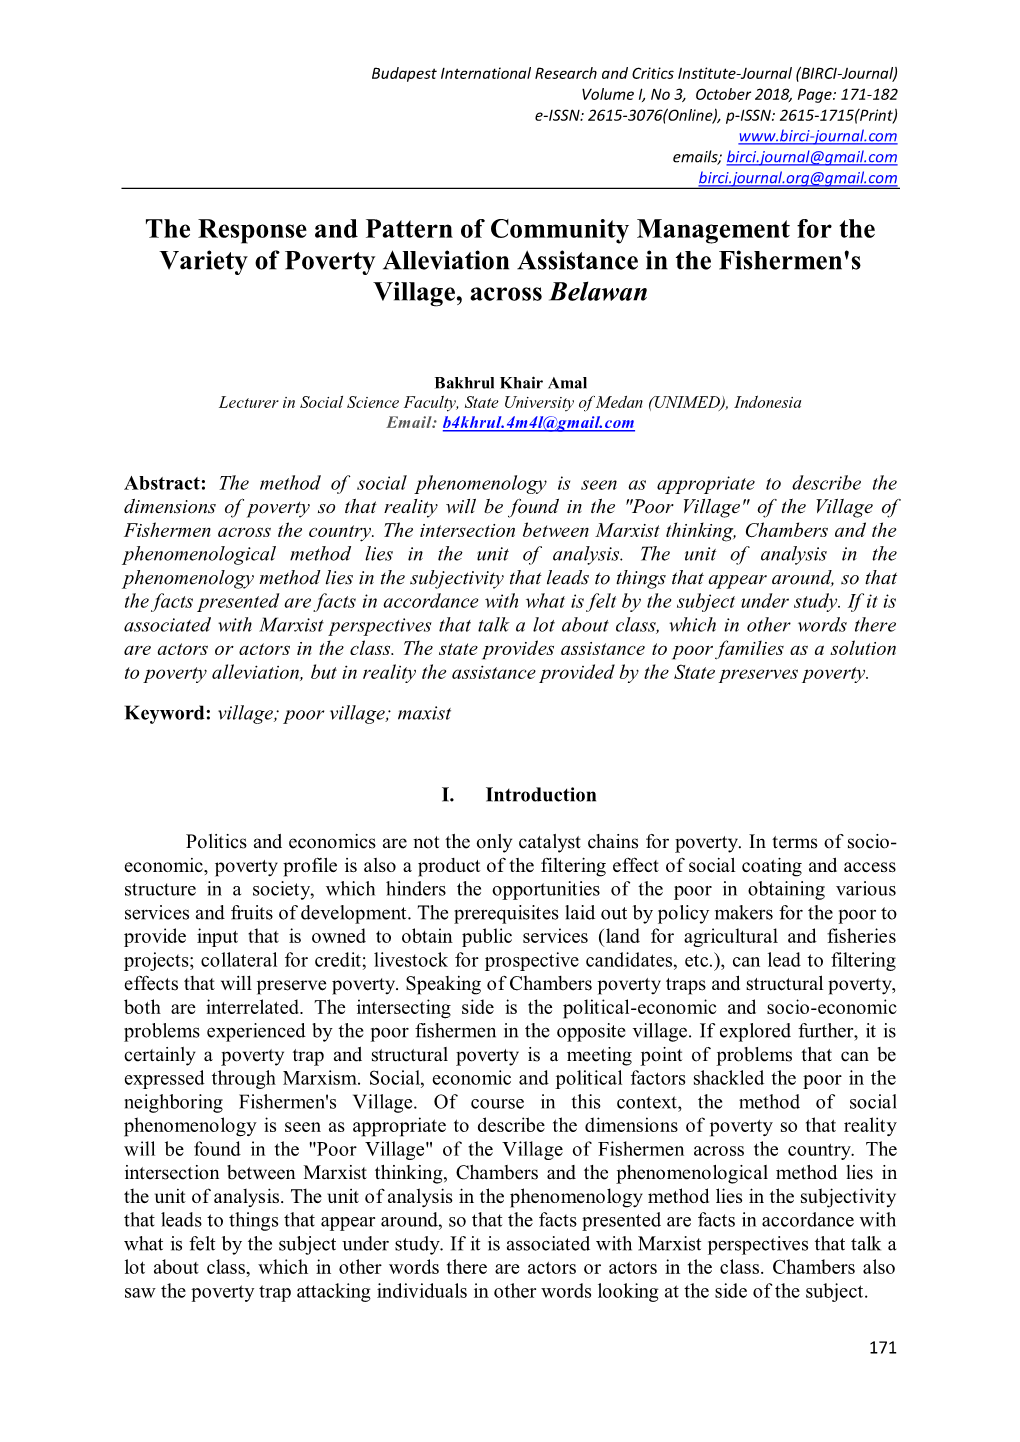 The Response and Pattern of Community Management for the Variety of Poverty Alleviation Assistance in the Fishermen's Village, Across Belawan